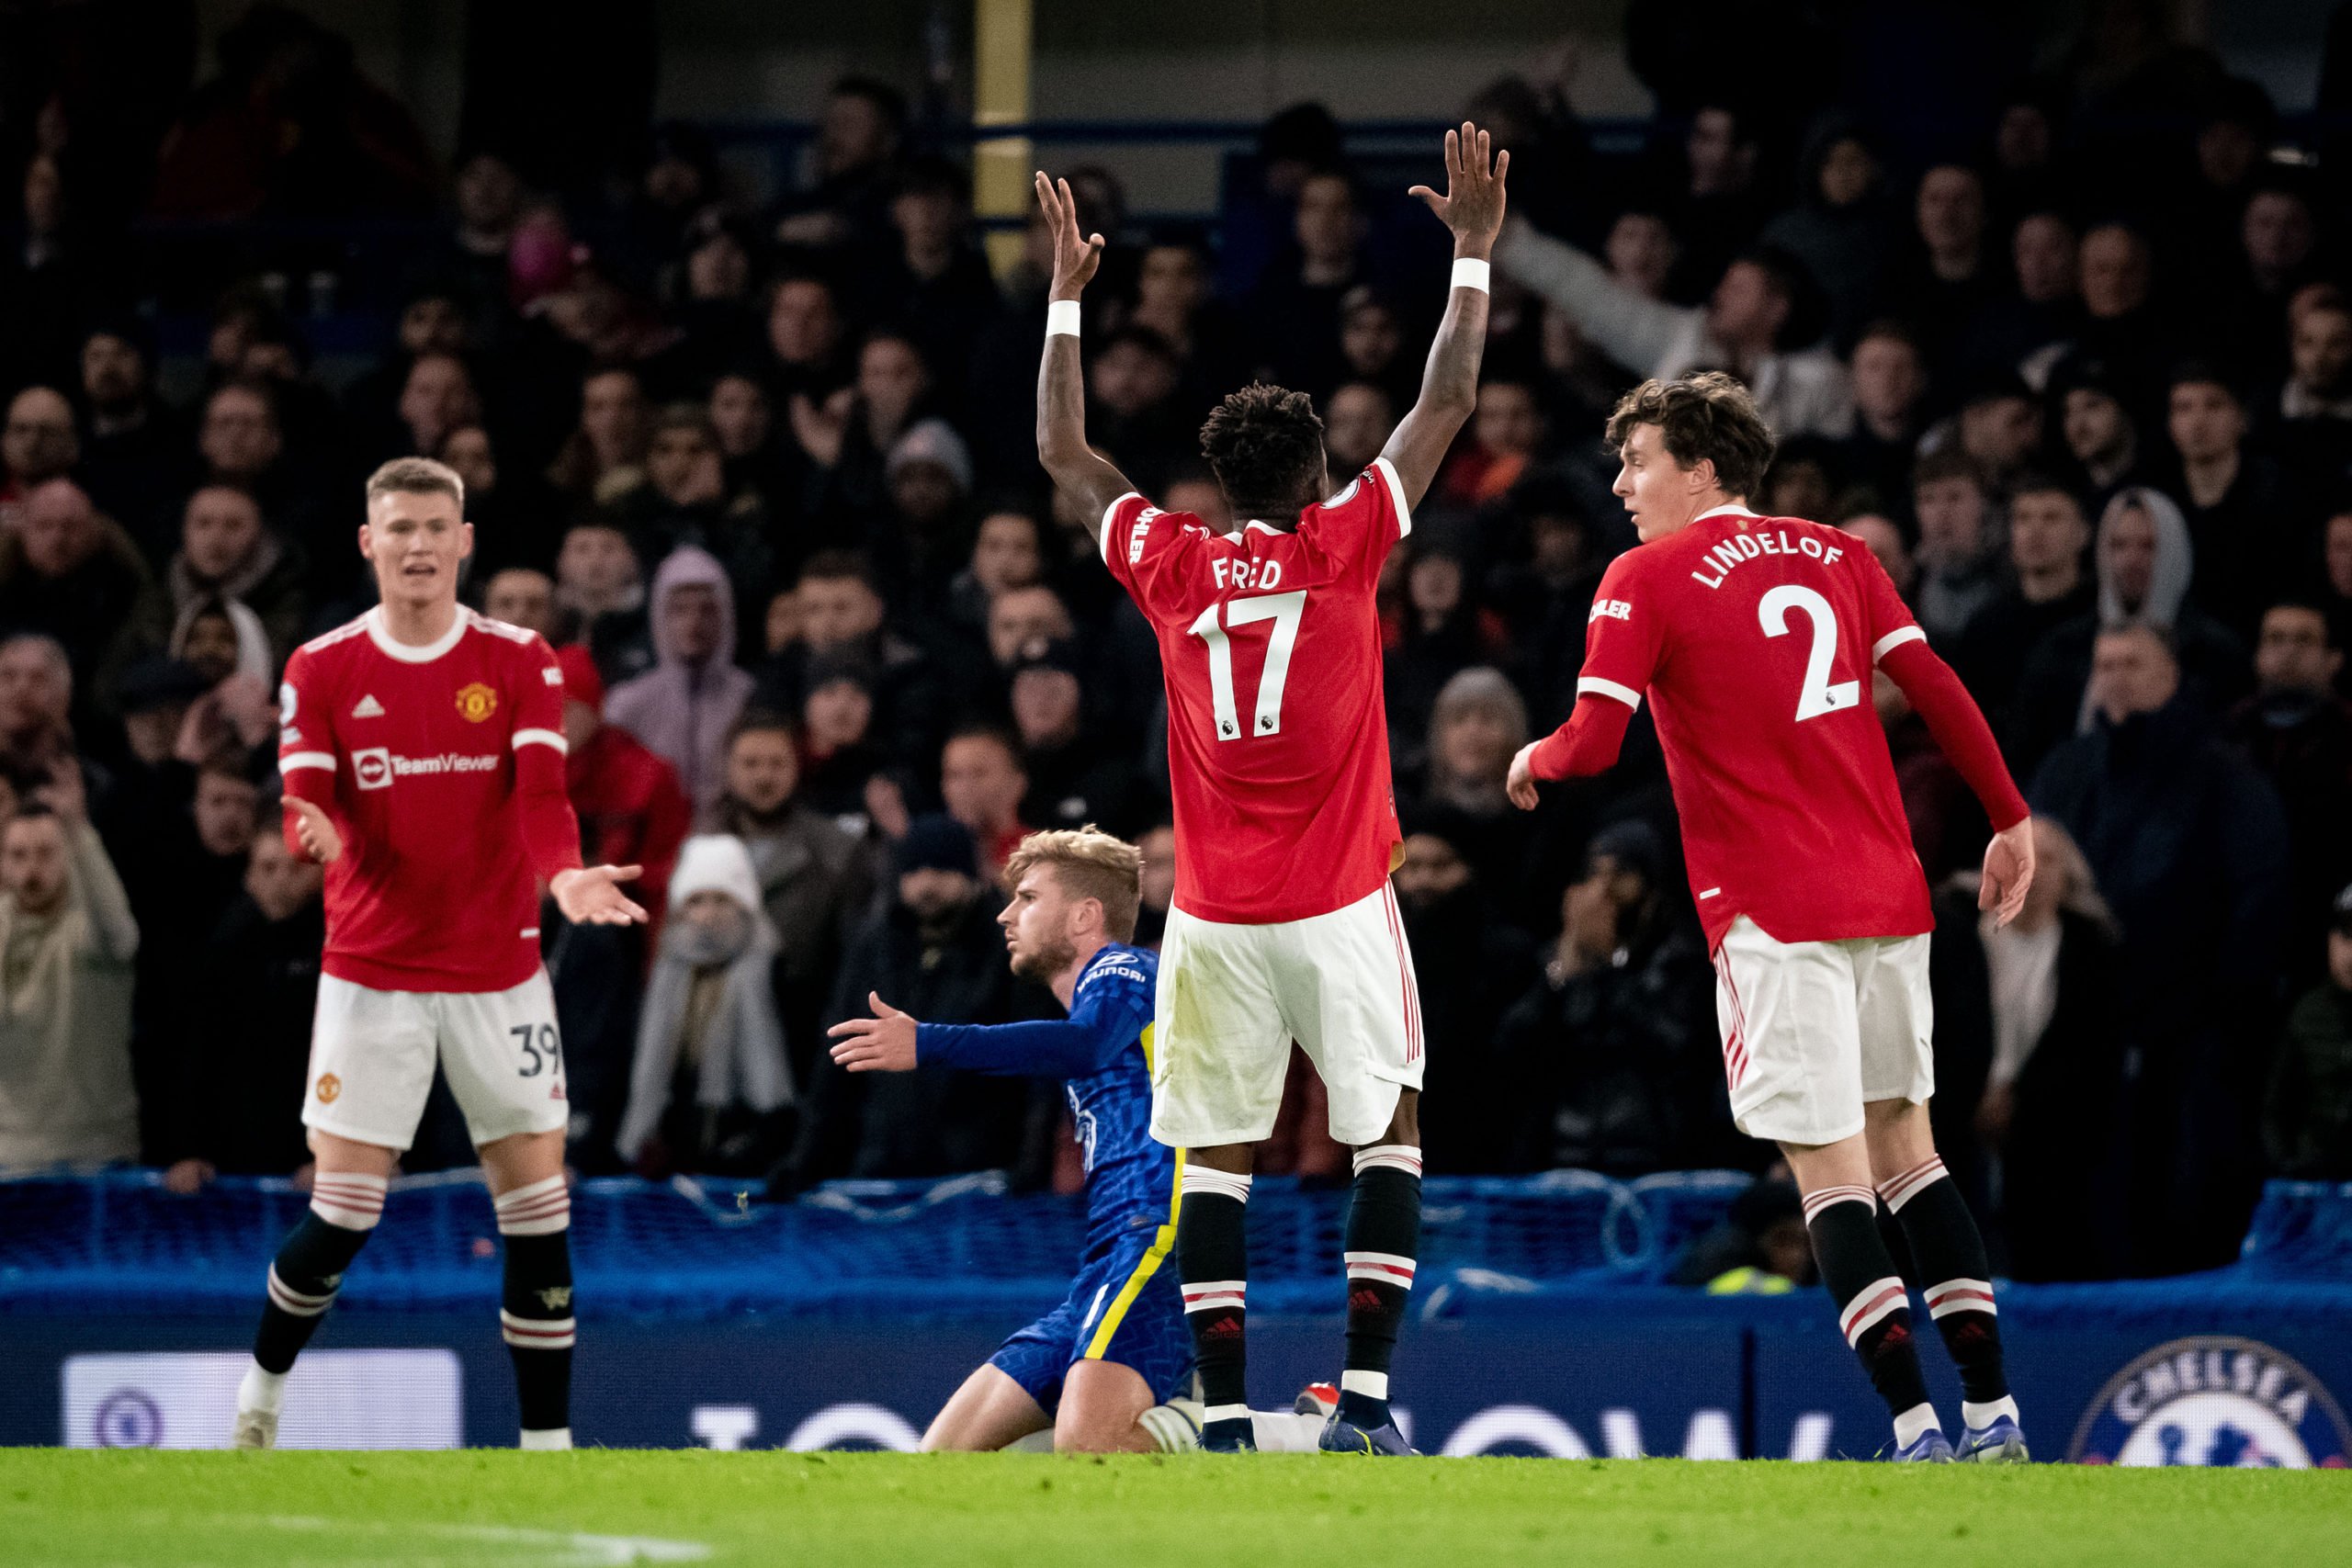 Chelsea fans claim 25-year-old's poor display 'cost' them in Manchester United draw